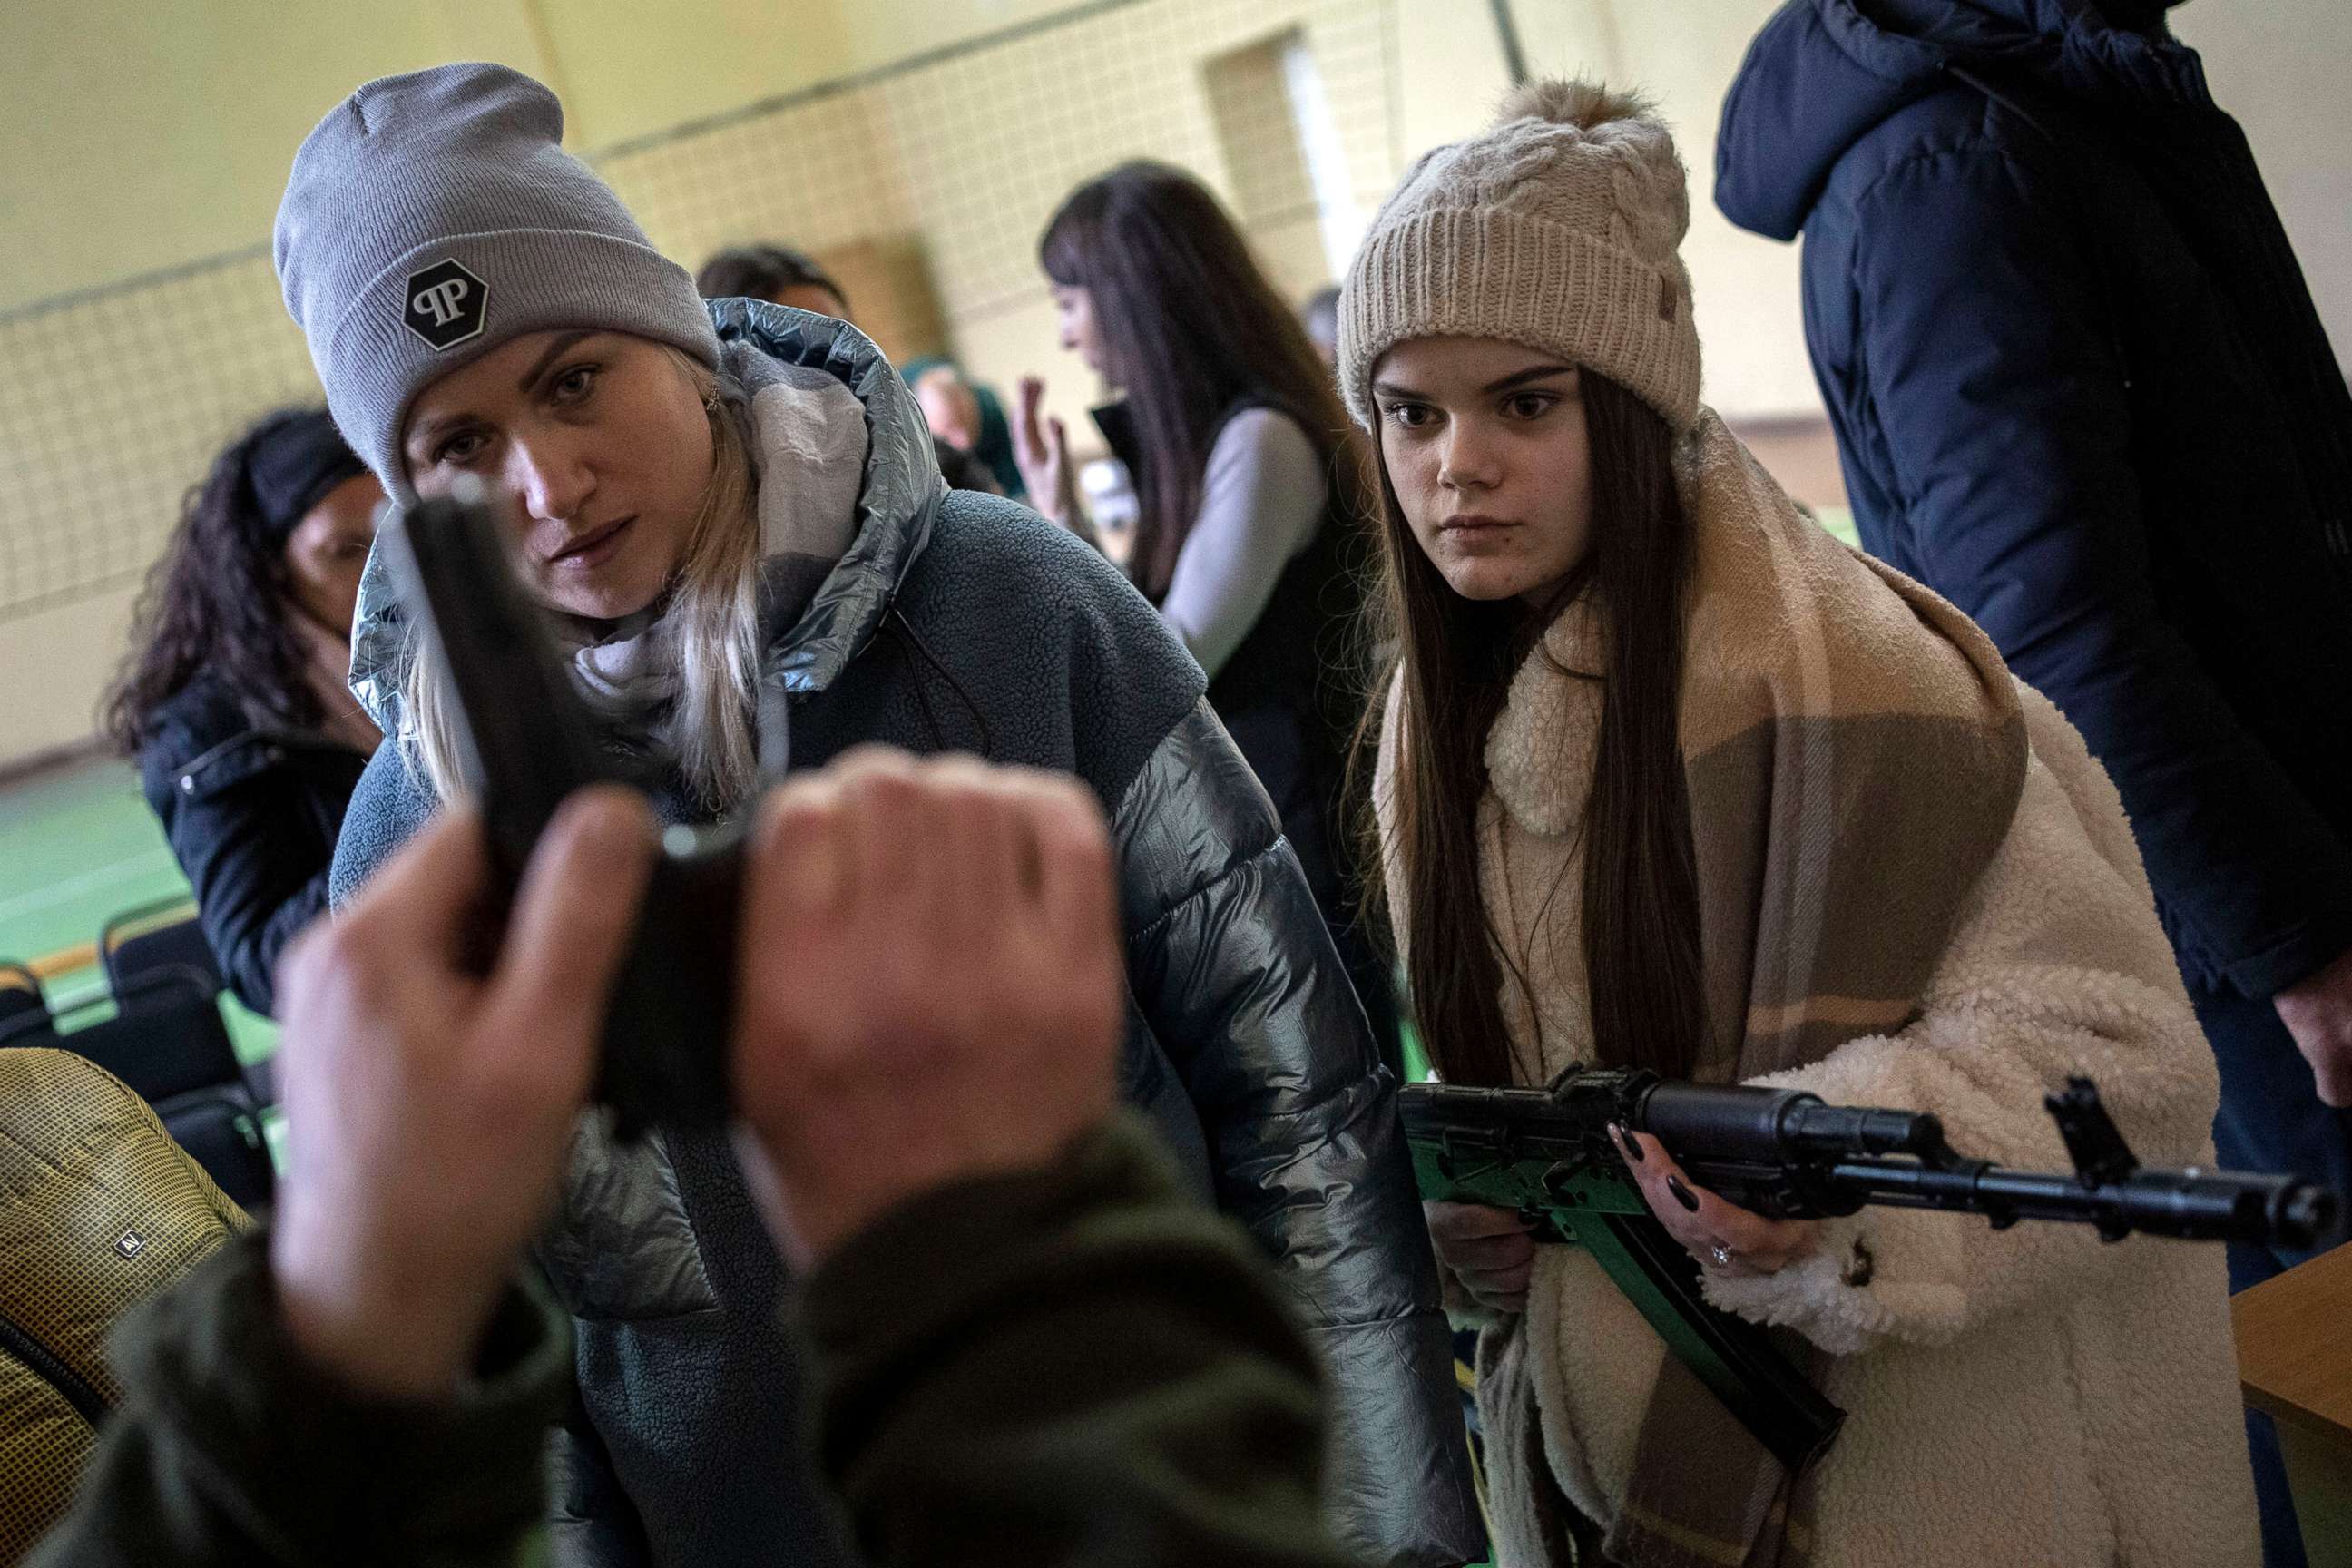 PHOTO: Ukrainian civilians receive weapons training, in the outskirts of Lviv, western Ukraine, on March 7, 2022.